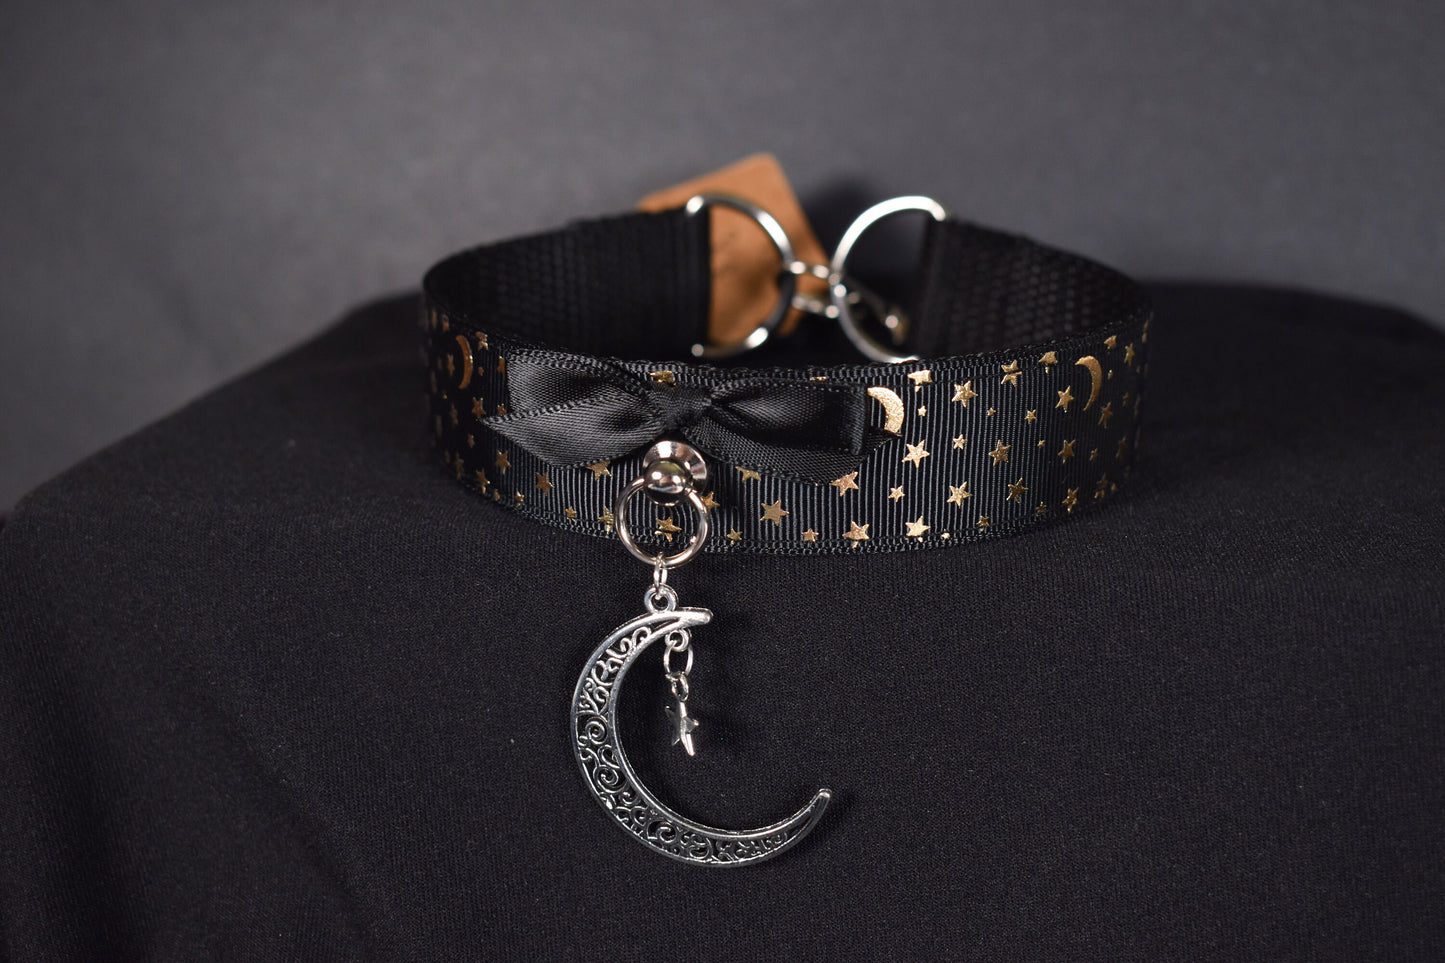 Made to your size / Black and golden moon choker / goth / emo / kitten play / alt fashion / bdsm / pet play necklace / kawaii fashion